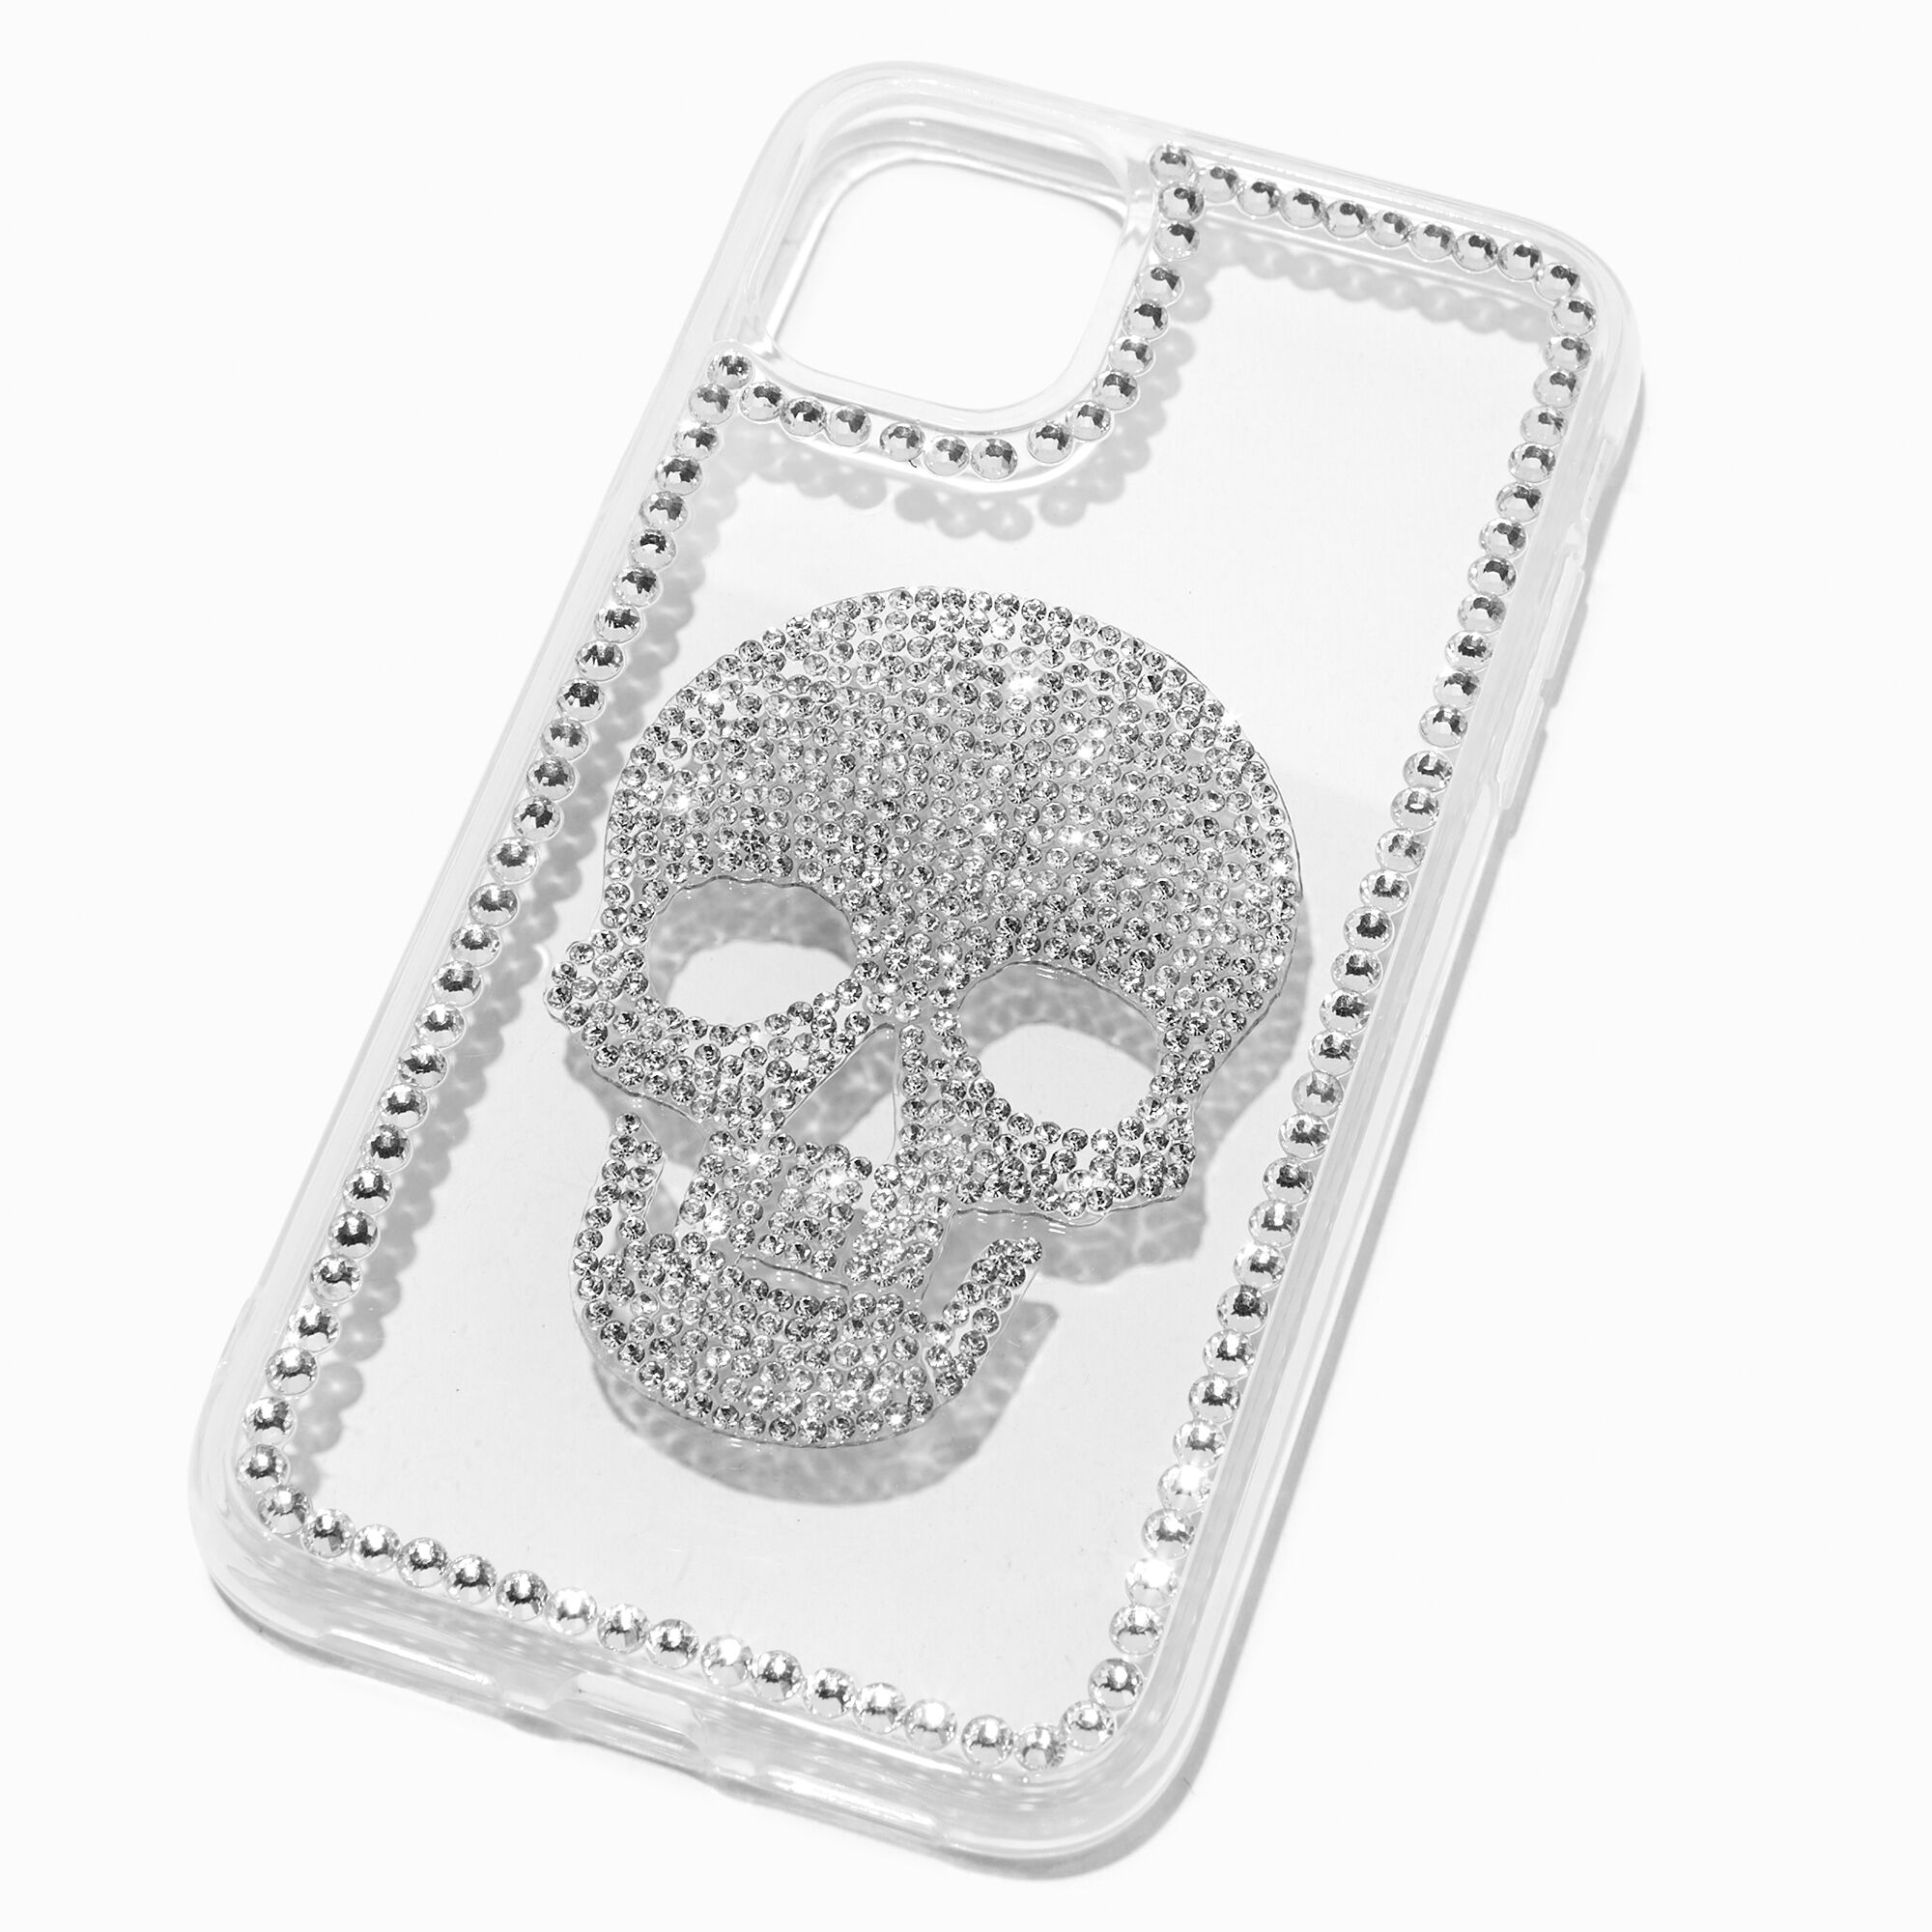 View Claires Bling Skull Protective Phone Case Fits Iphone Xr11 information